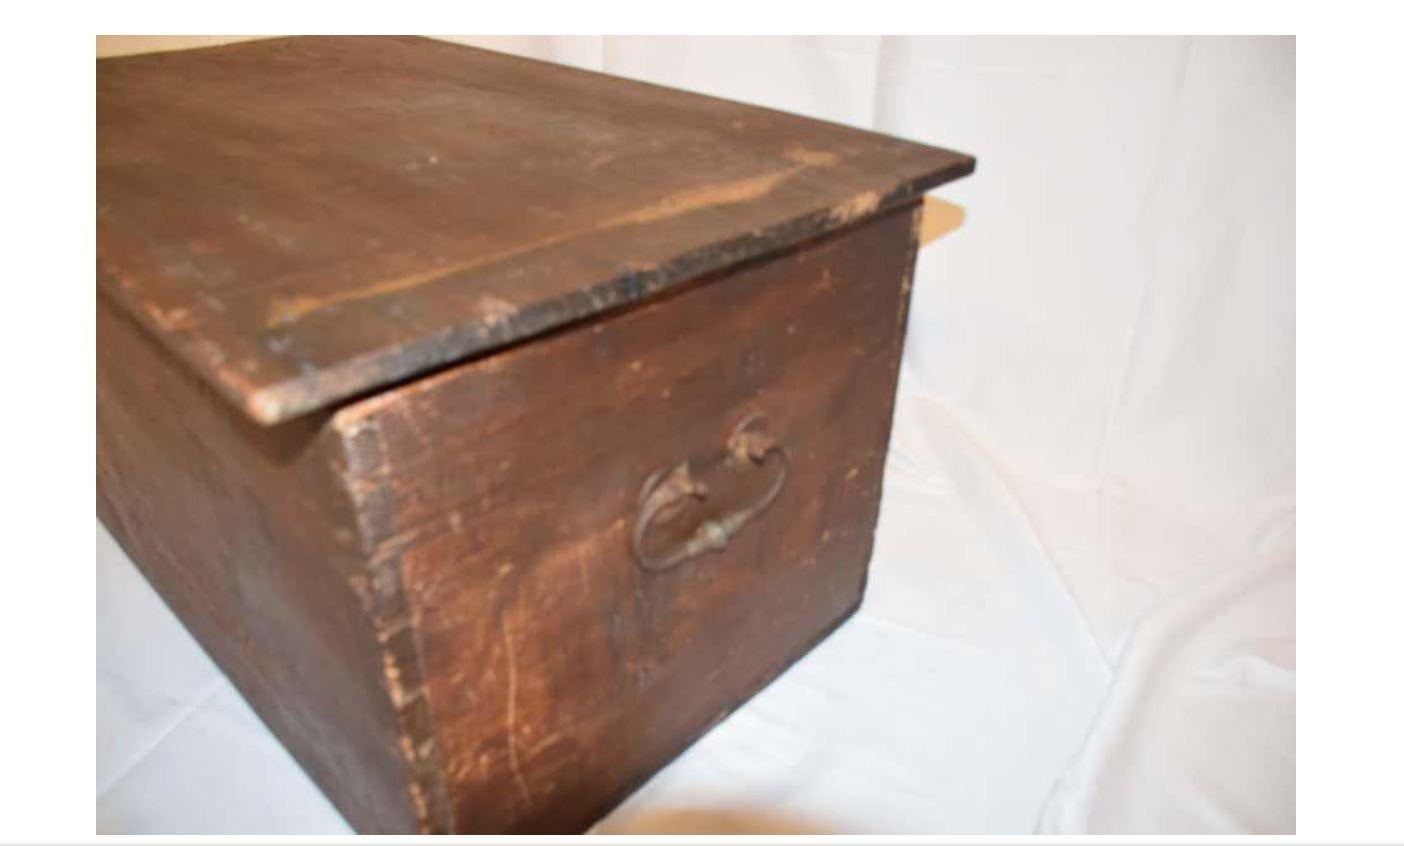 This antique rustic wooden trunk features hand forged handles and hinges with a hand carved interior and dovetailed corners. Today this trunk would make a great feature in a stylish living room, bedroom or study.

H 18.25 in. x W 36.25 in. x D